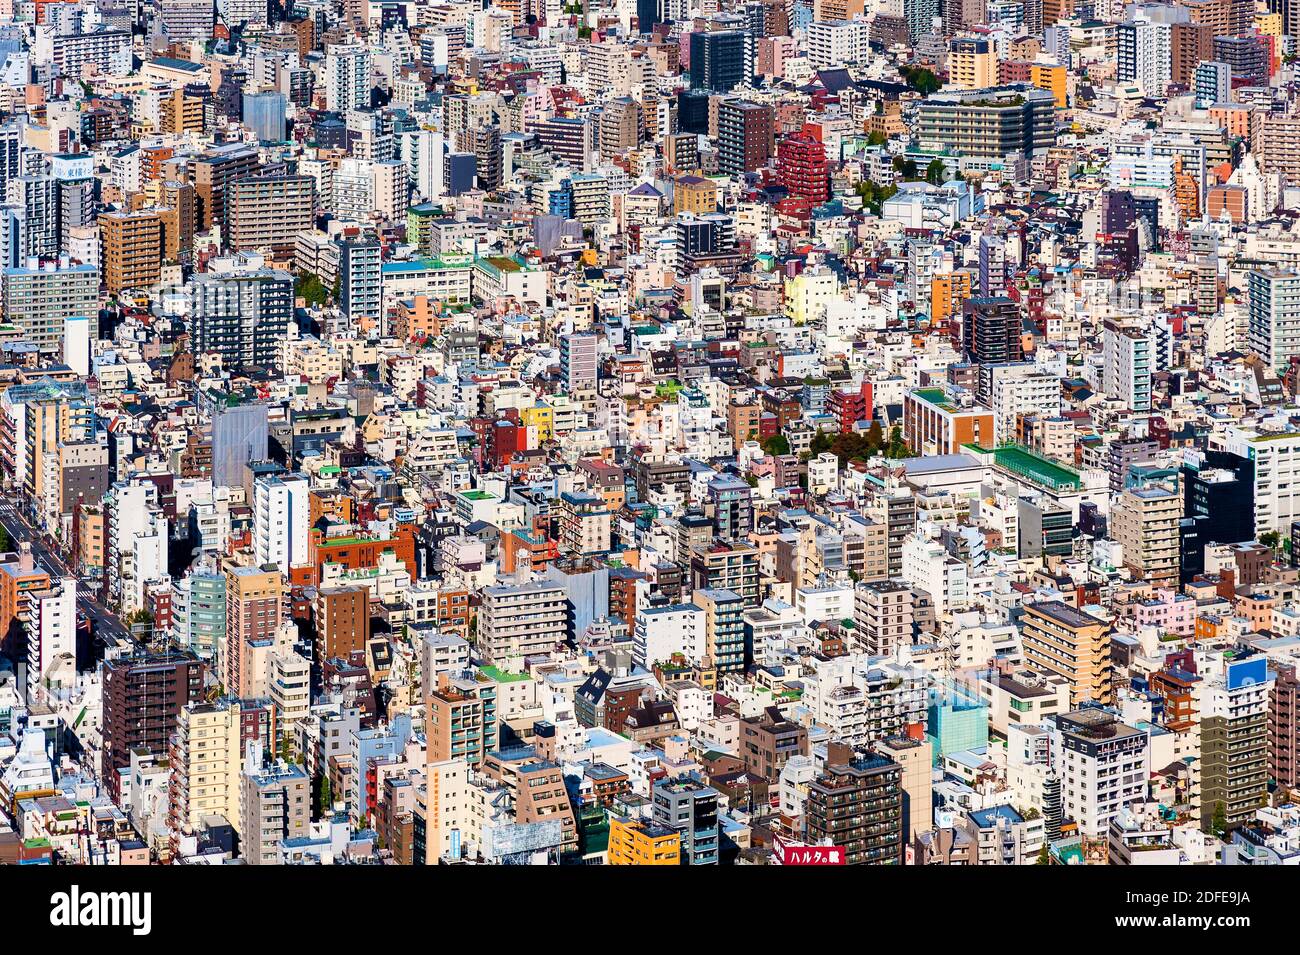 Urban Density and Population Megalopolis, Aerial City View, Tokyo Japan Stock Photo